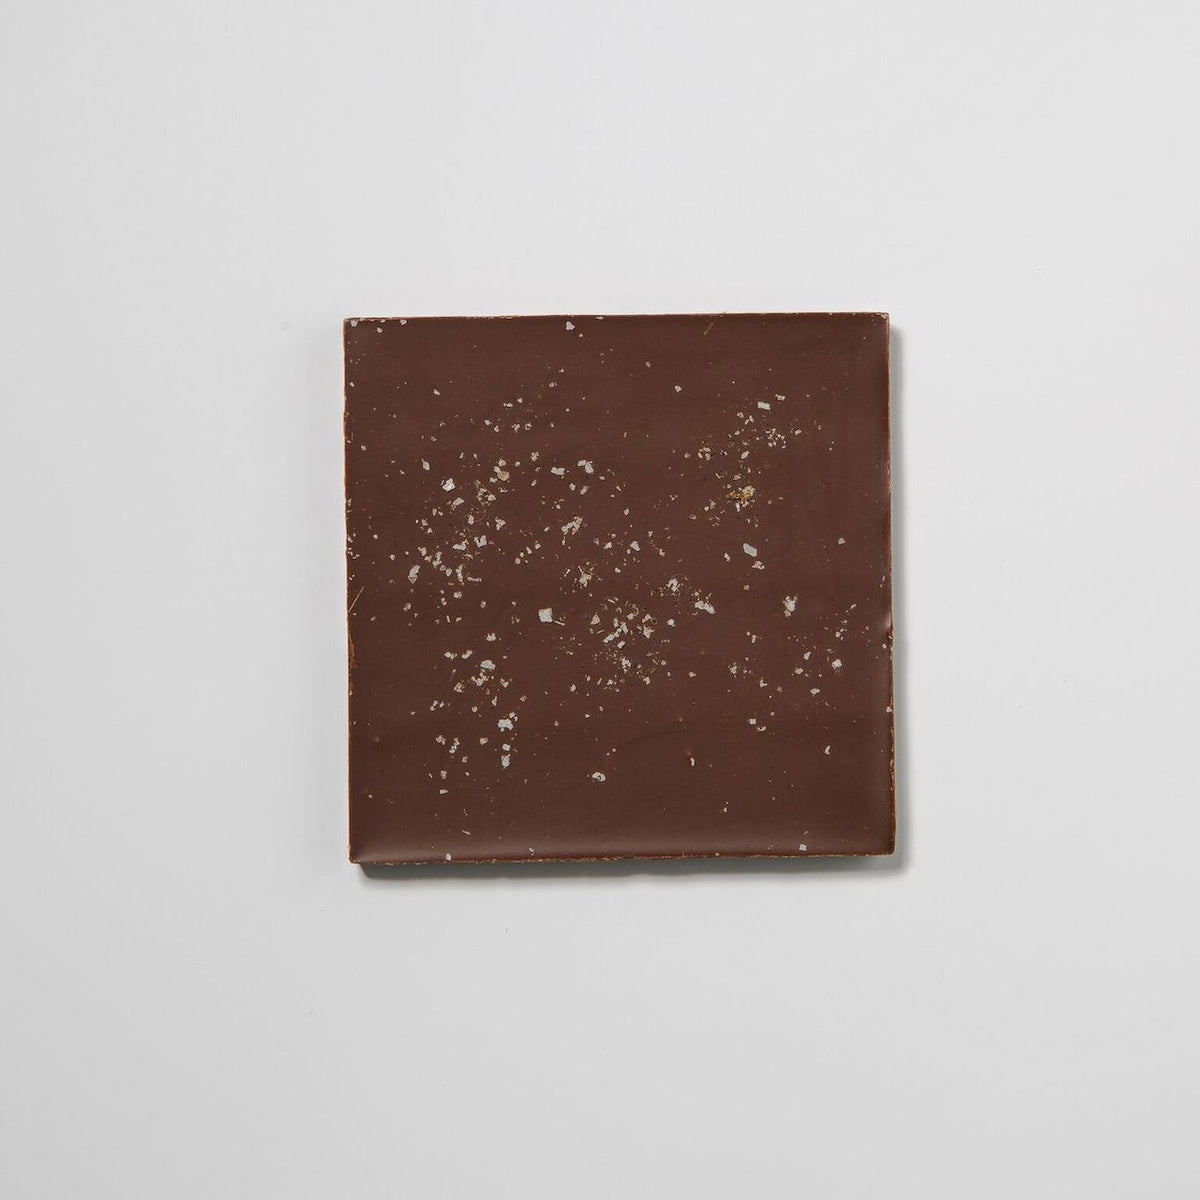 A square Almond Butter Chocolate Bar with sprinkles, made by Flint Chocolate.